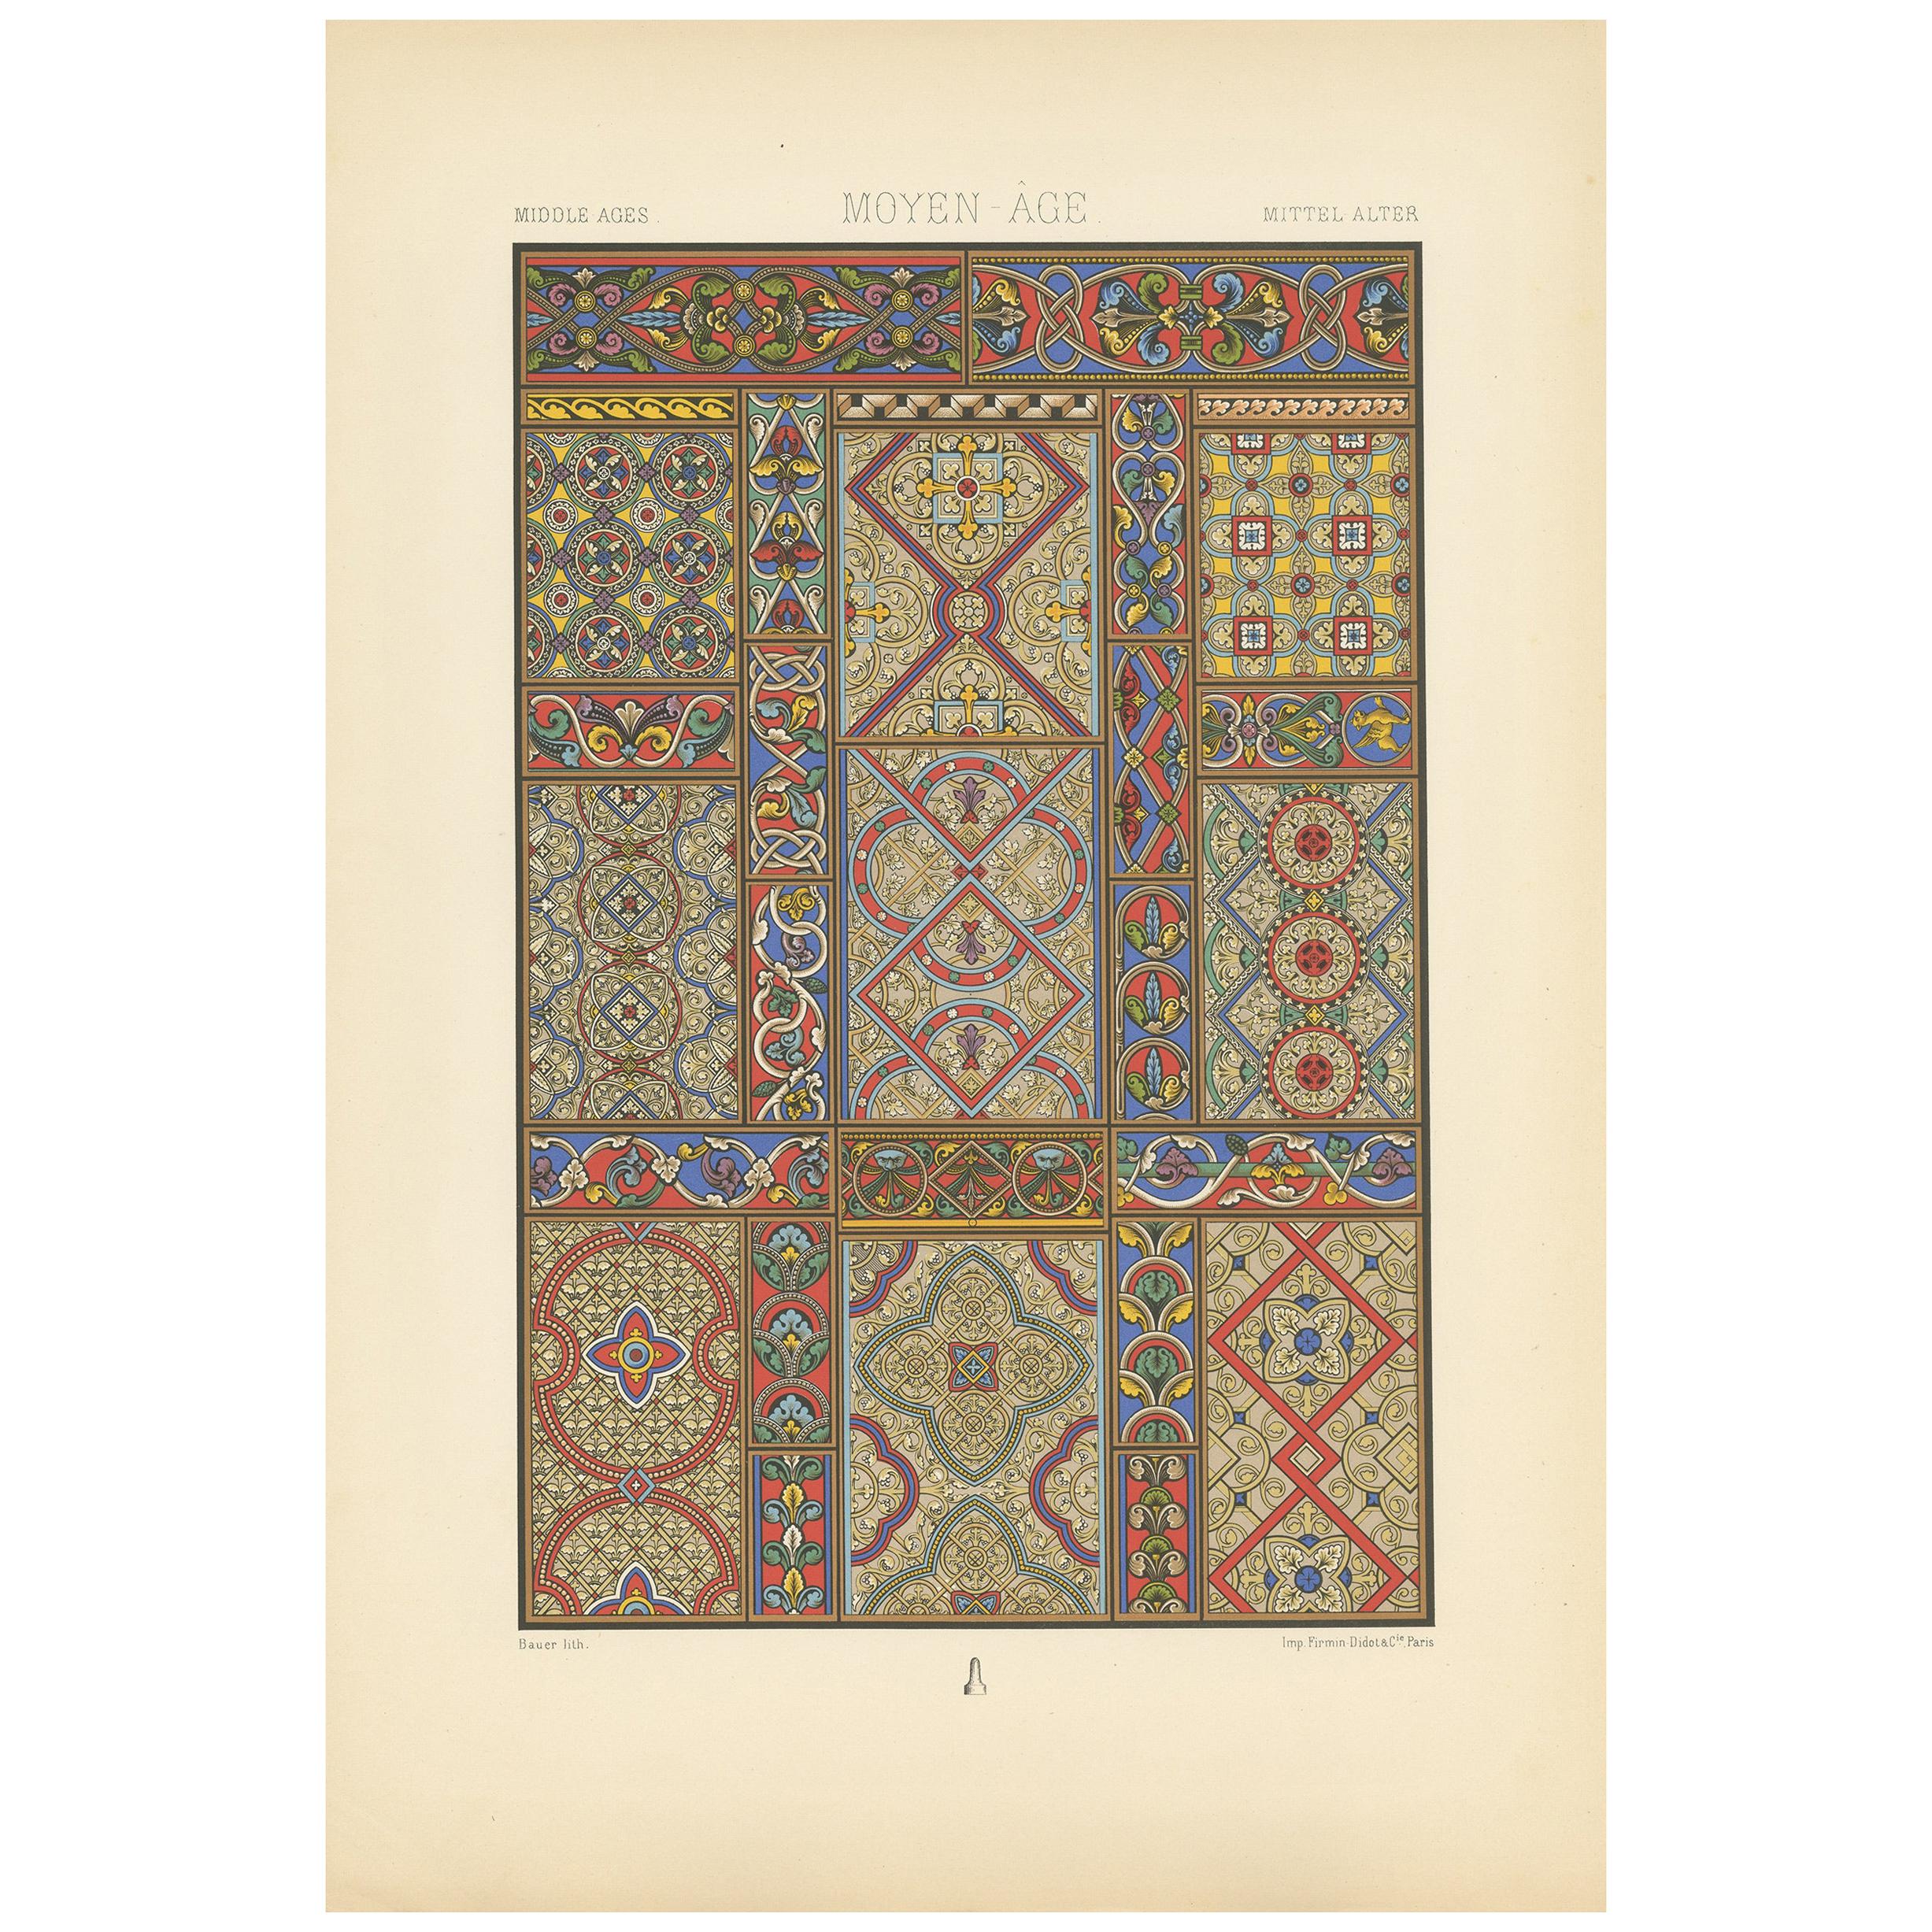 Pl. 55 Antique Print of Middle Ages Stained Glass Cathedrals, Racinet circa 1890 For Sale